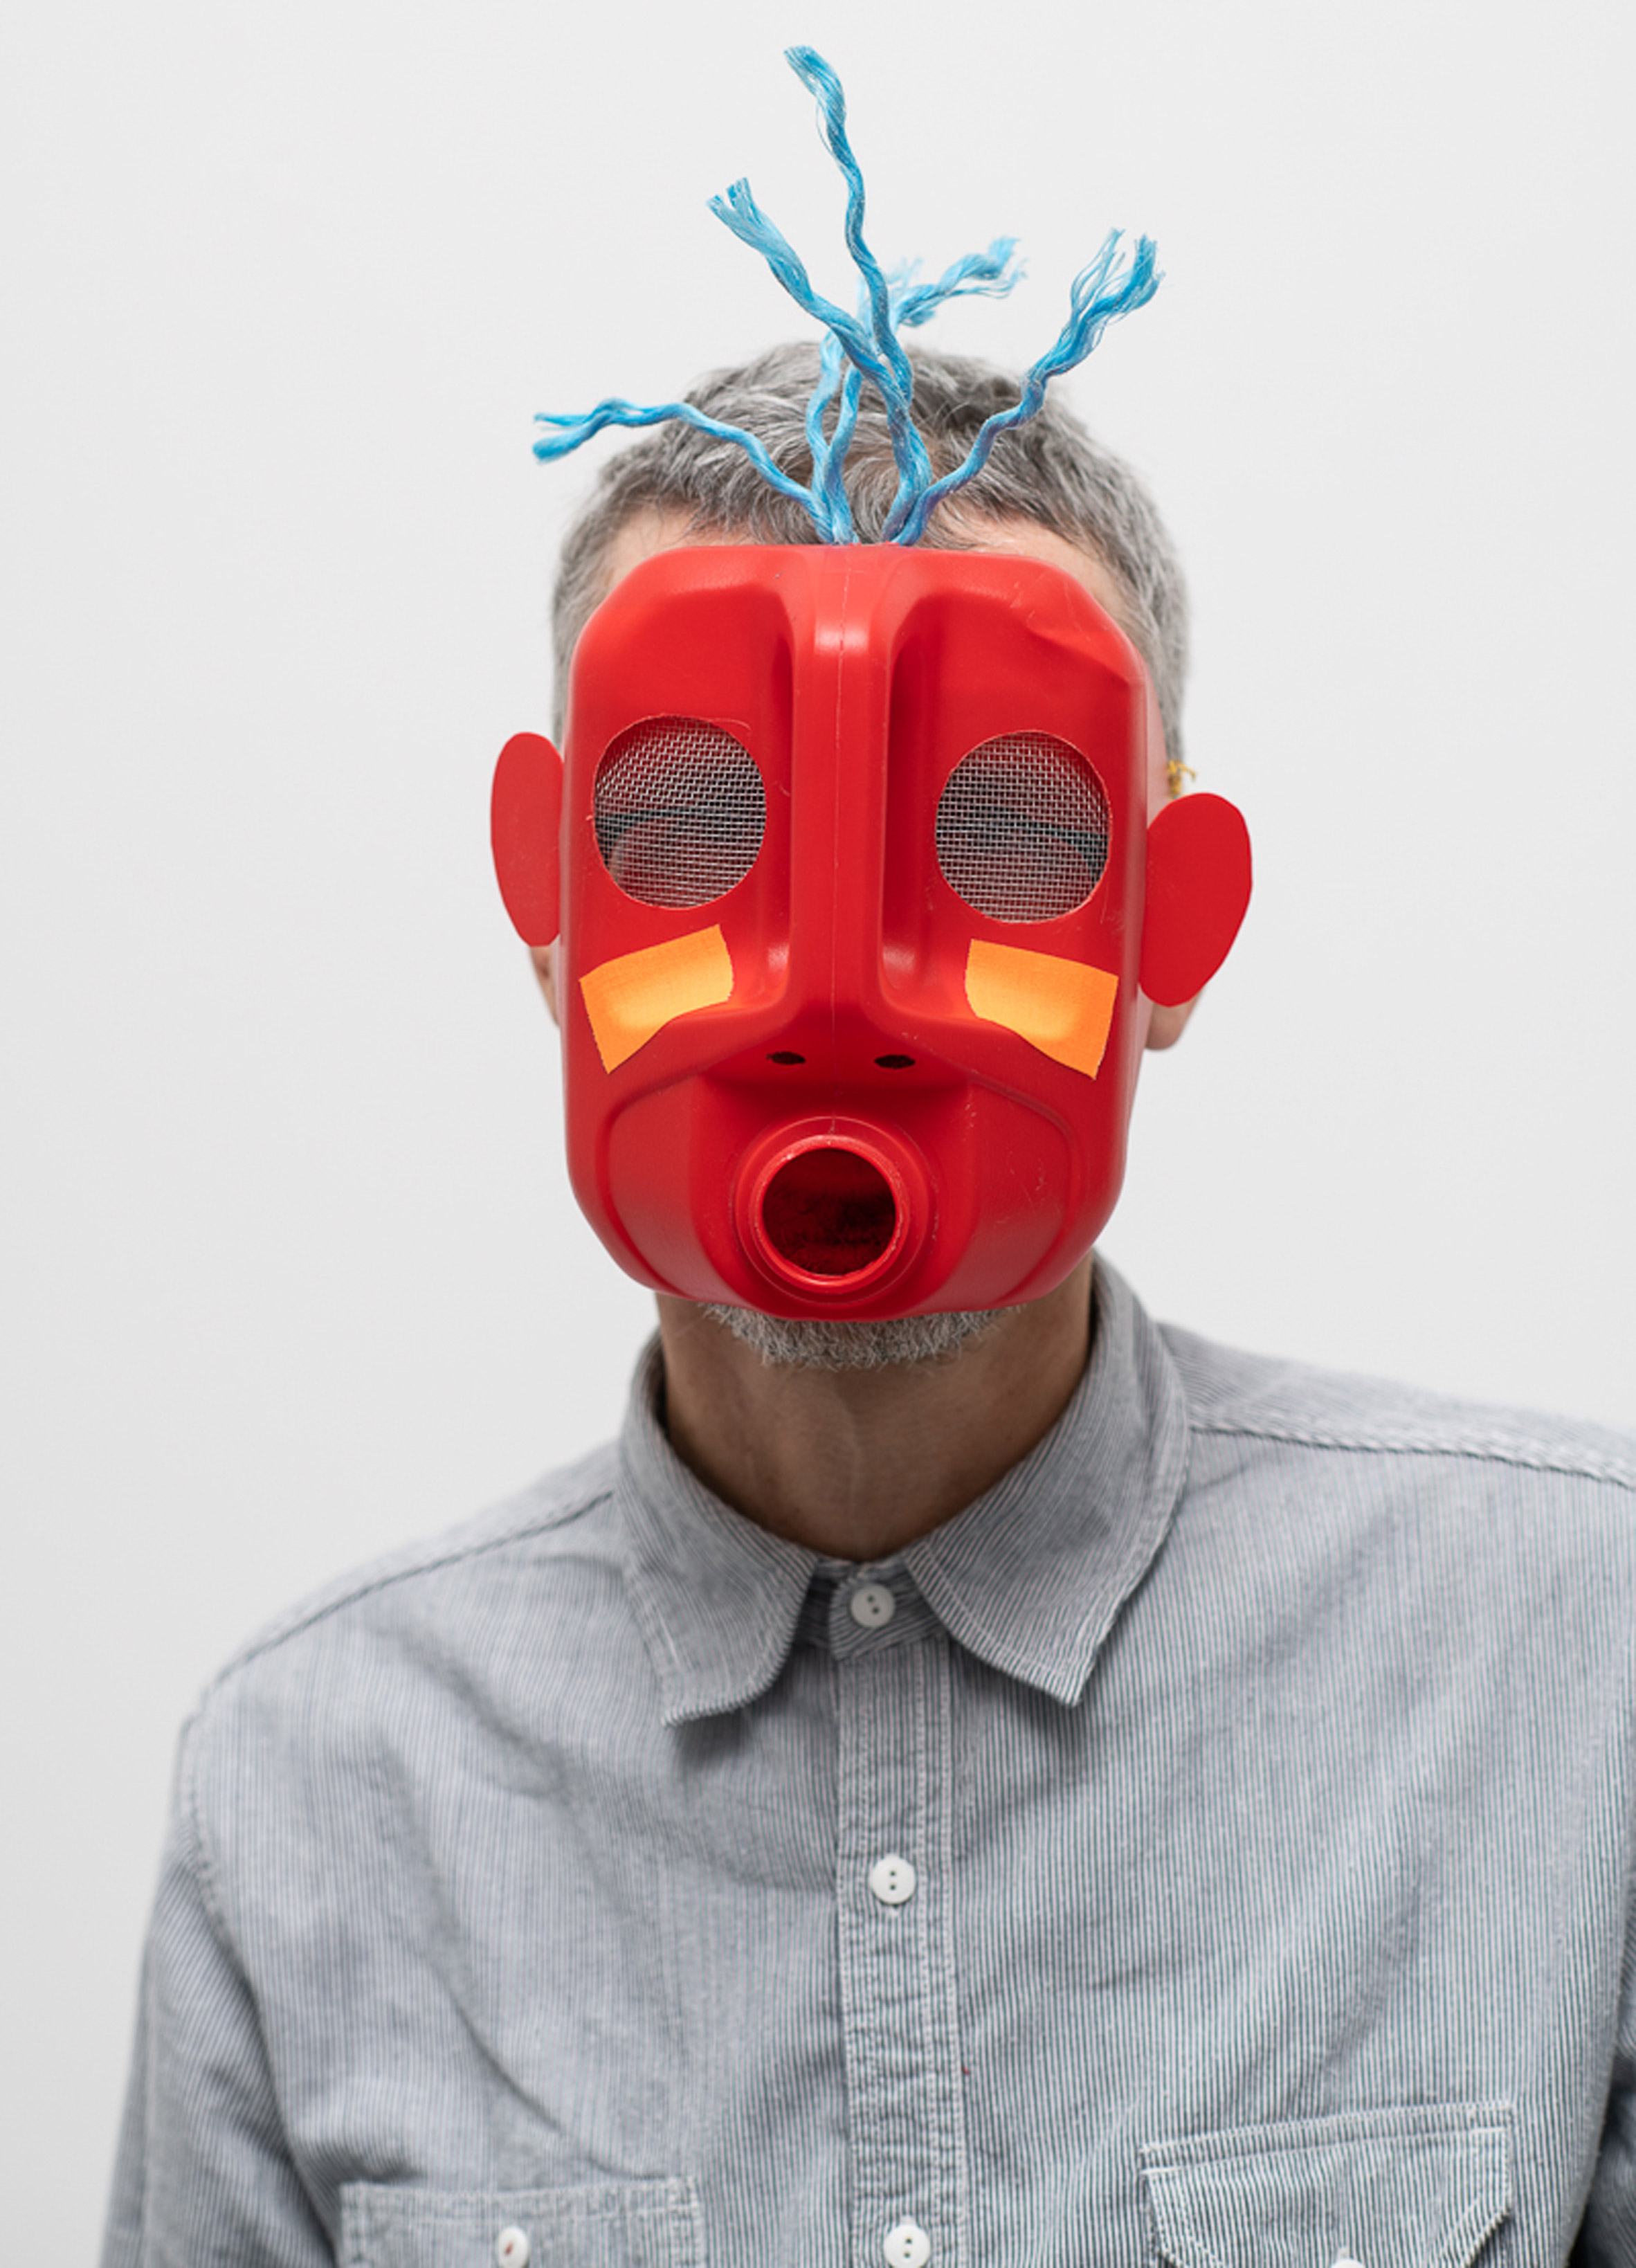 Masters of Disguise masks: Michael Marriott